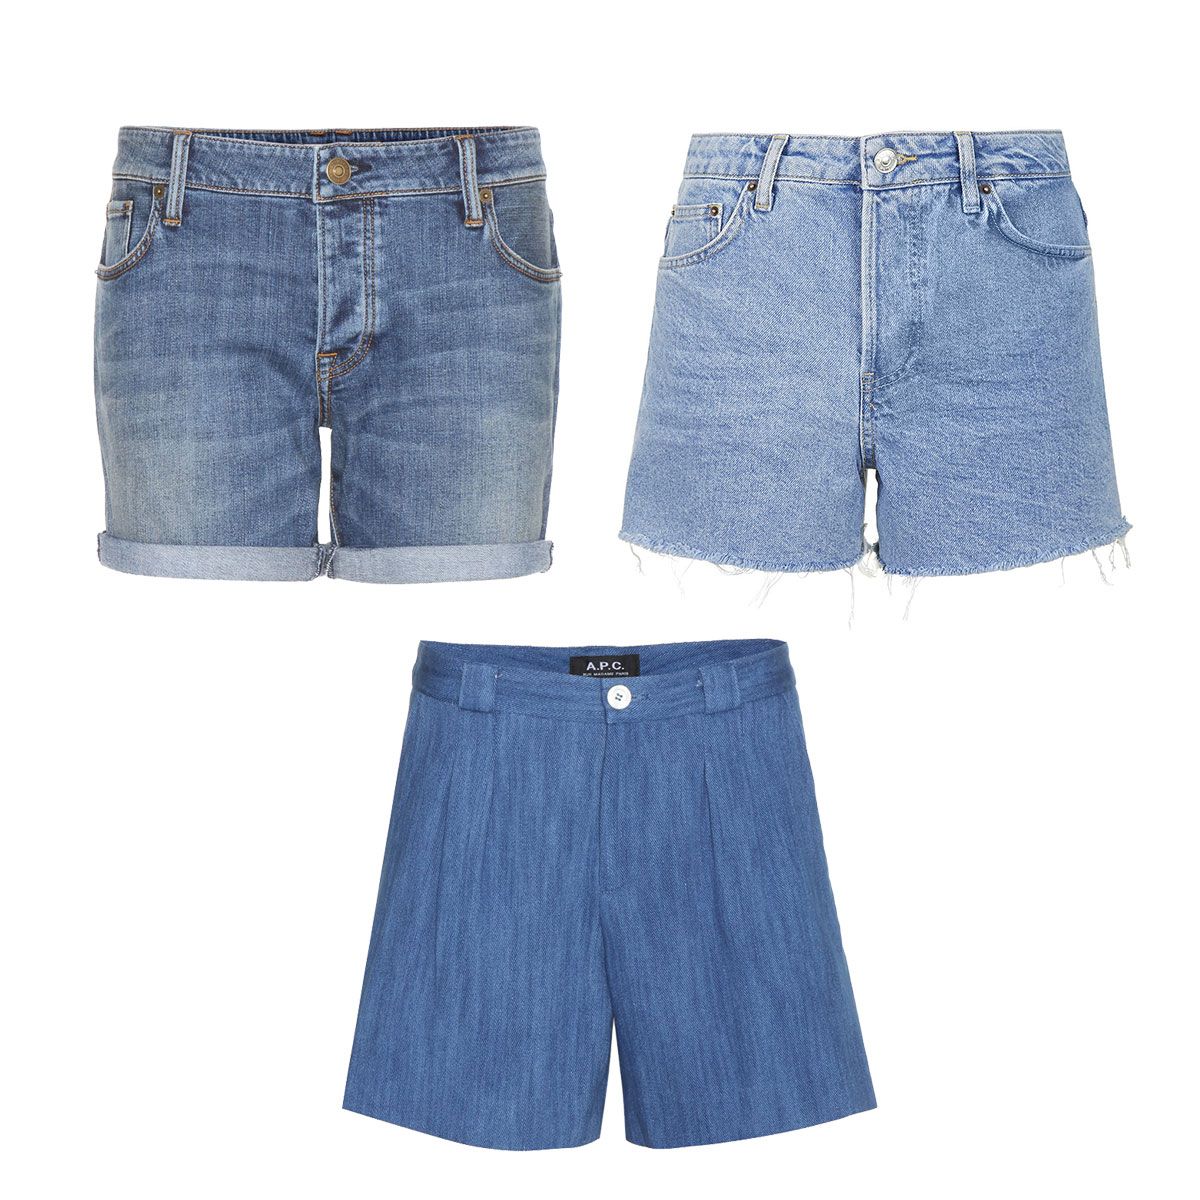 The Best Shorts For Your Body Type